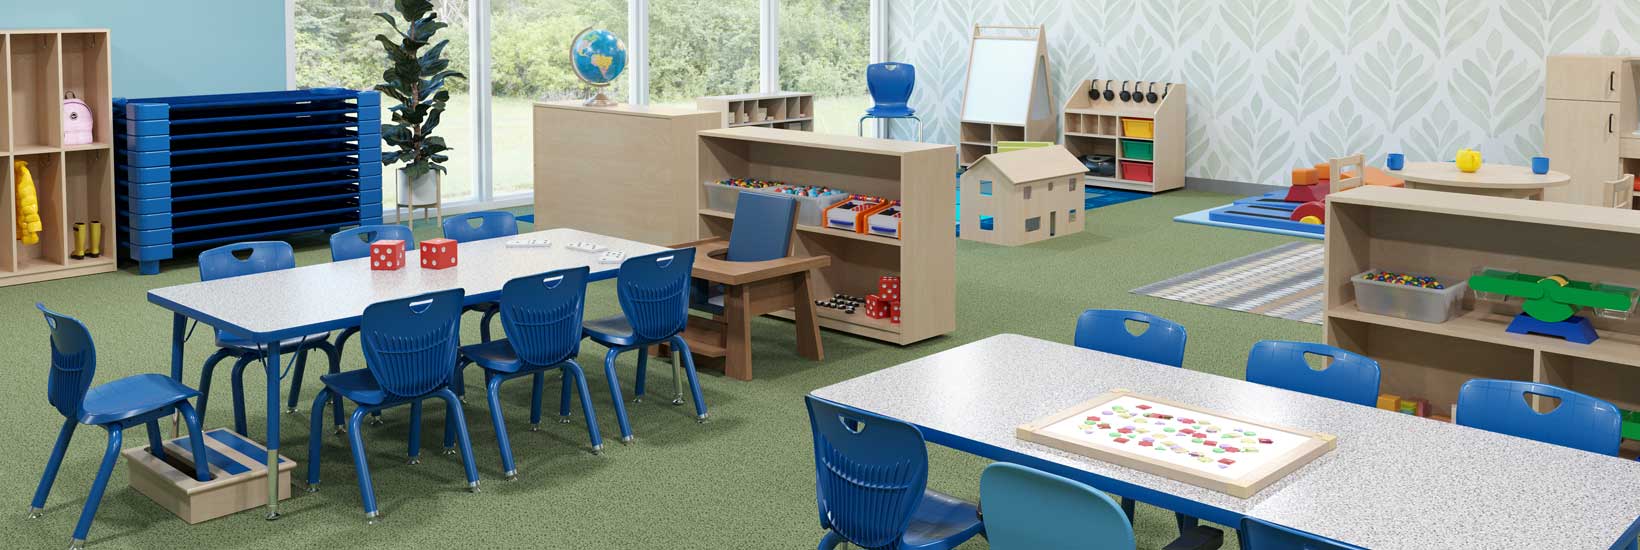 Early Childhood Inclusion Space View 2